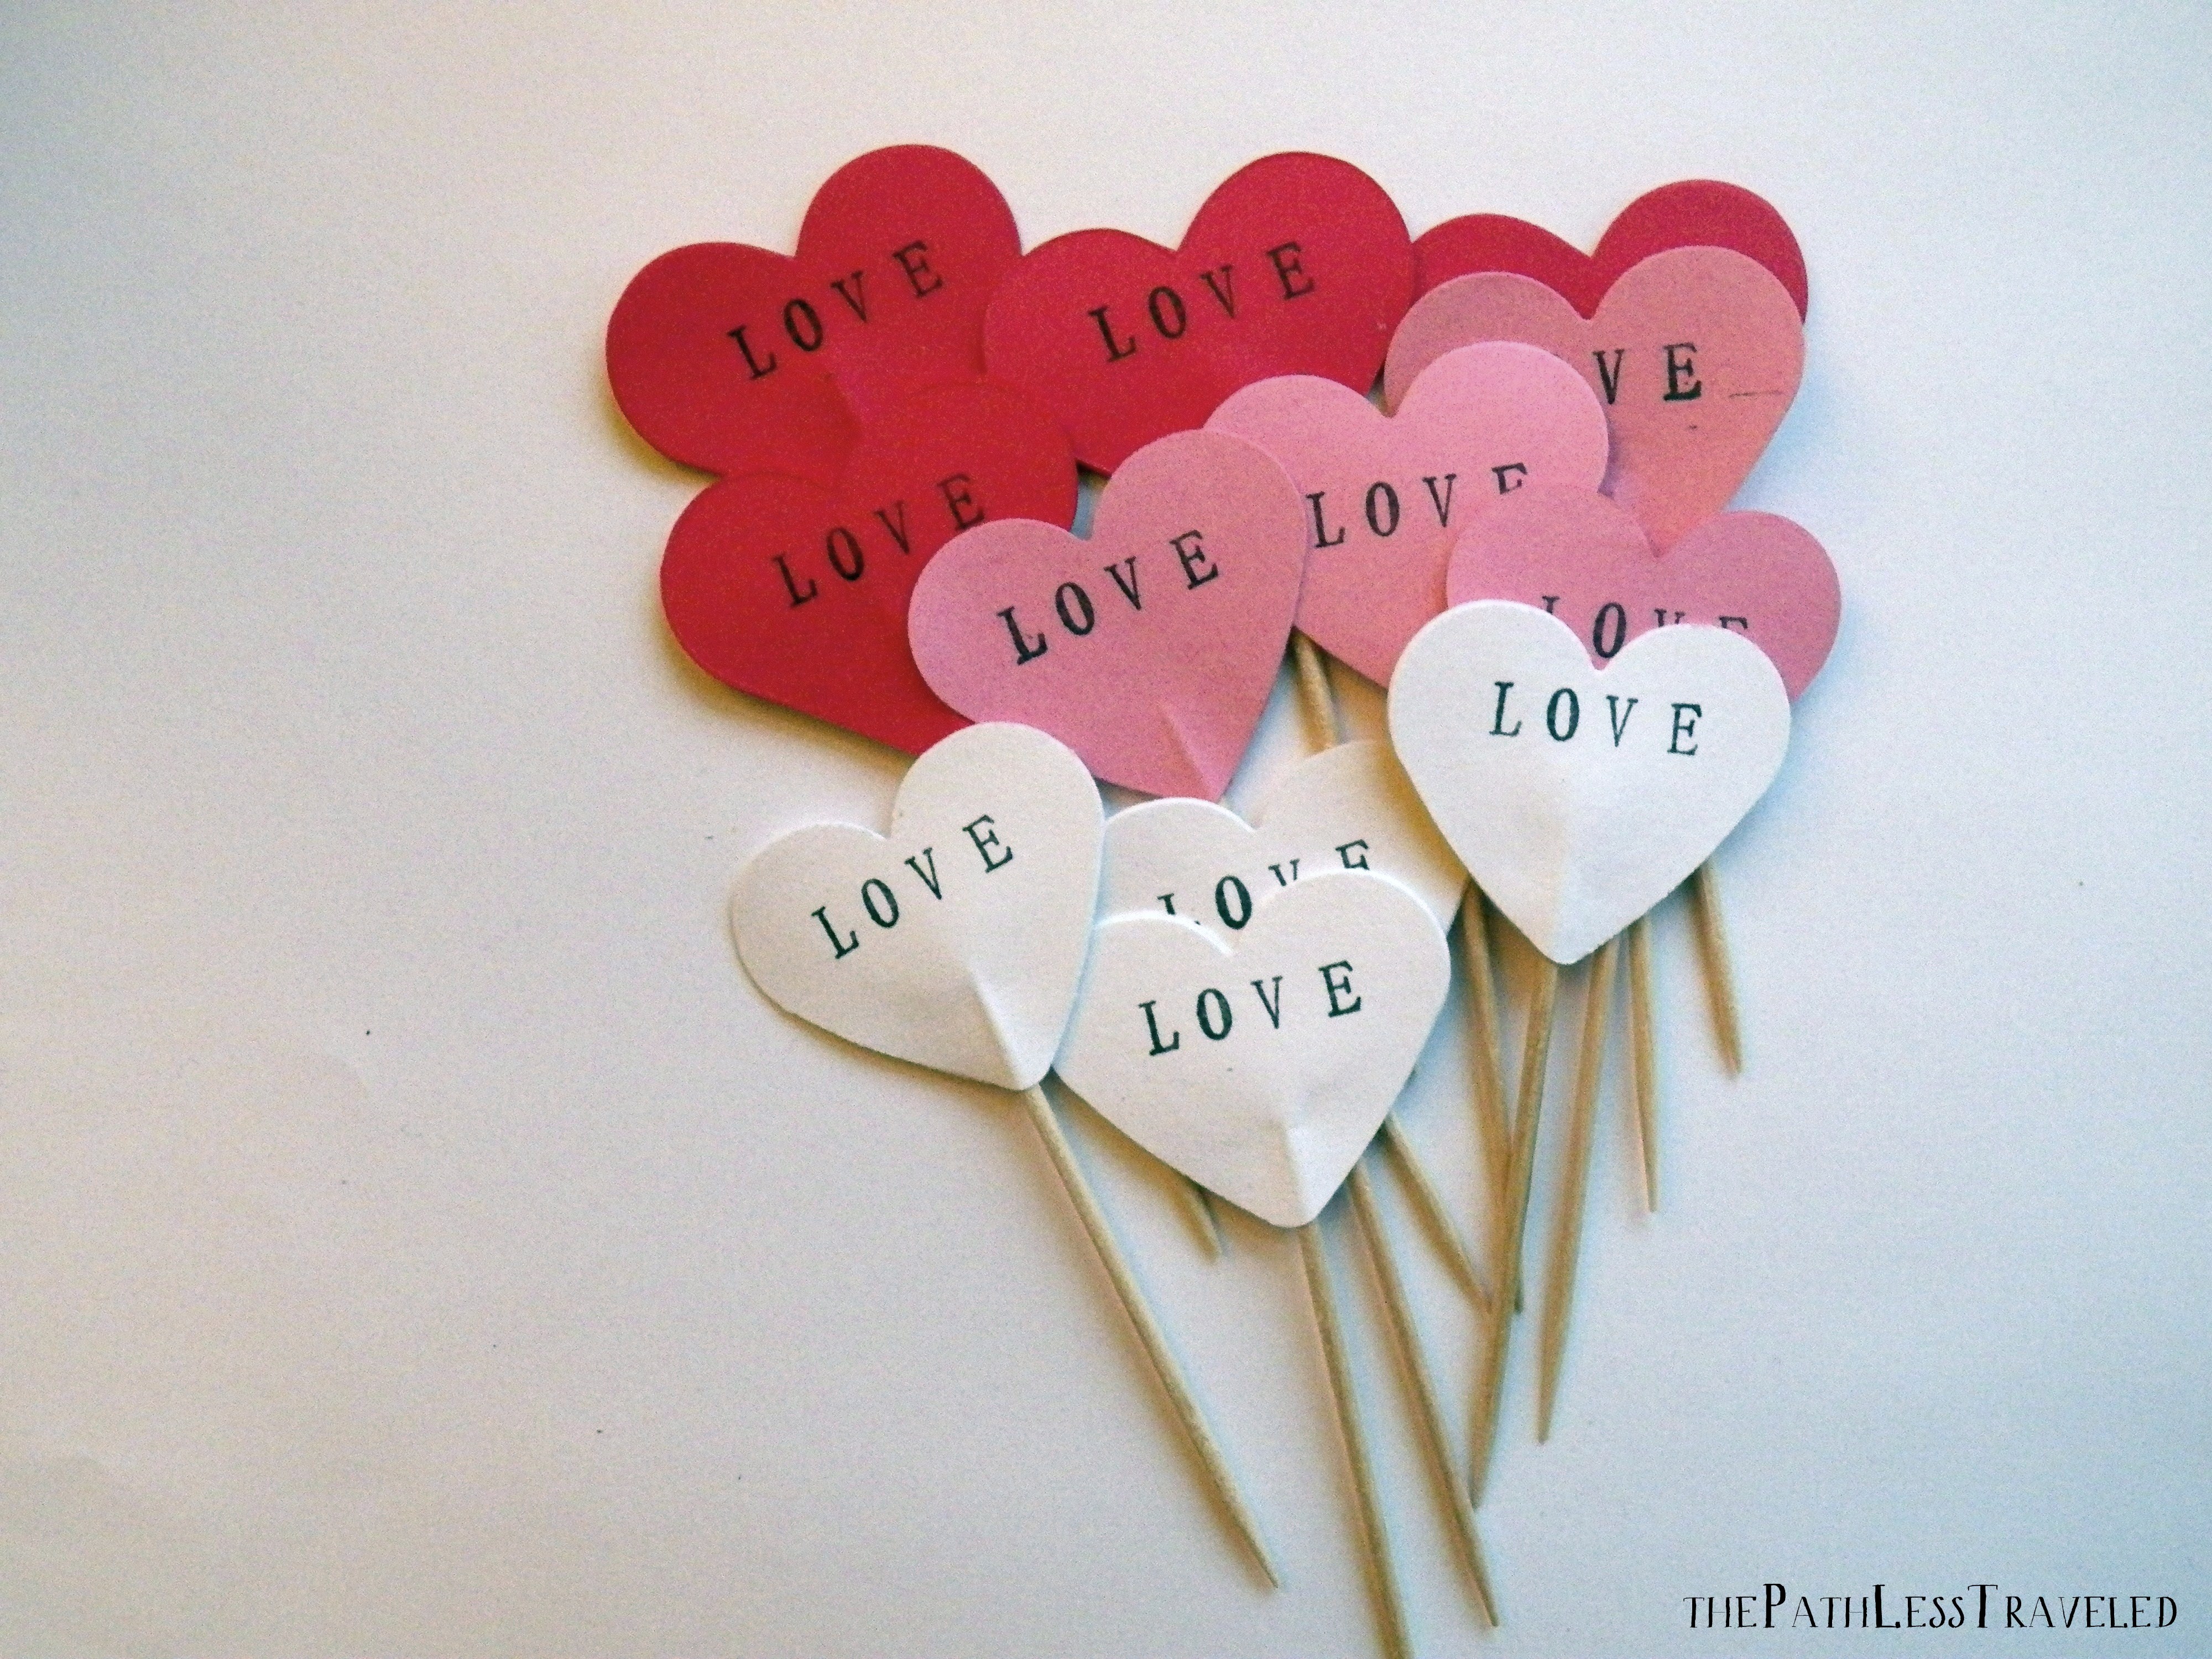 A romantic set of 12 heart cupcake toppers in your choice of red, pink, white or a mix of all three